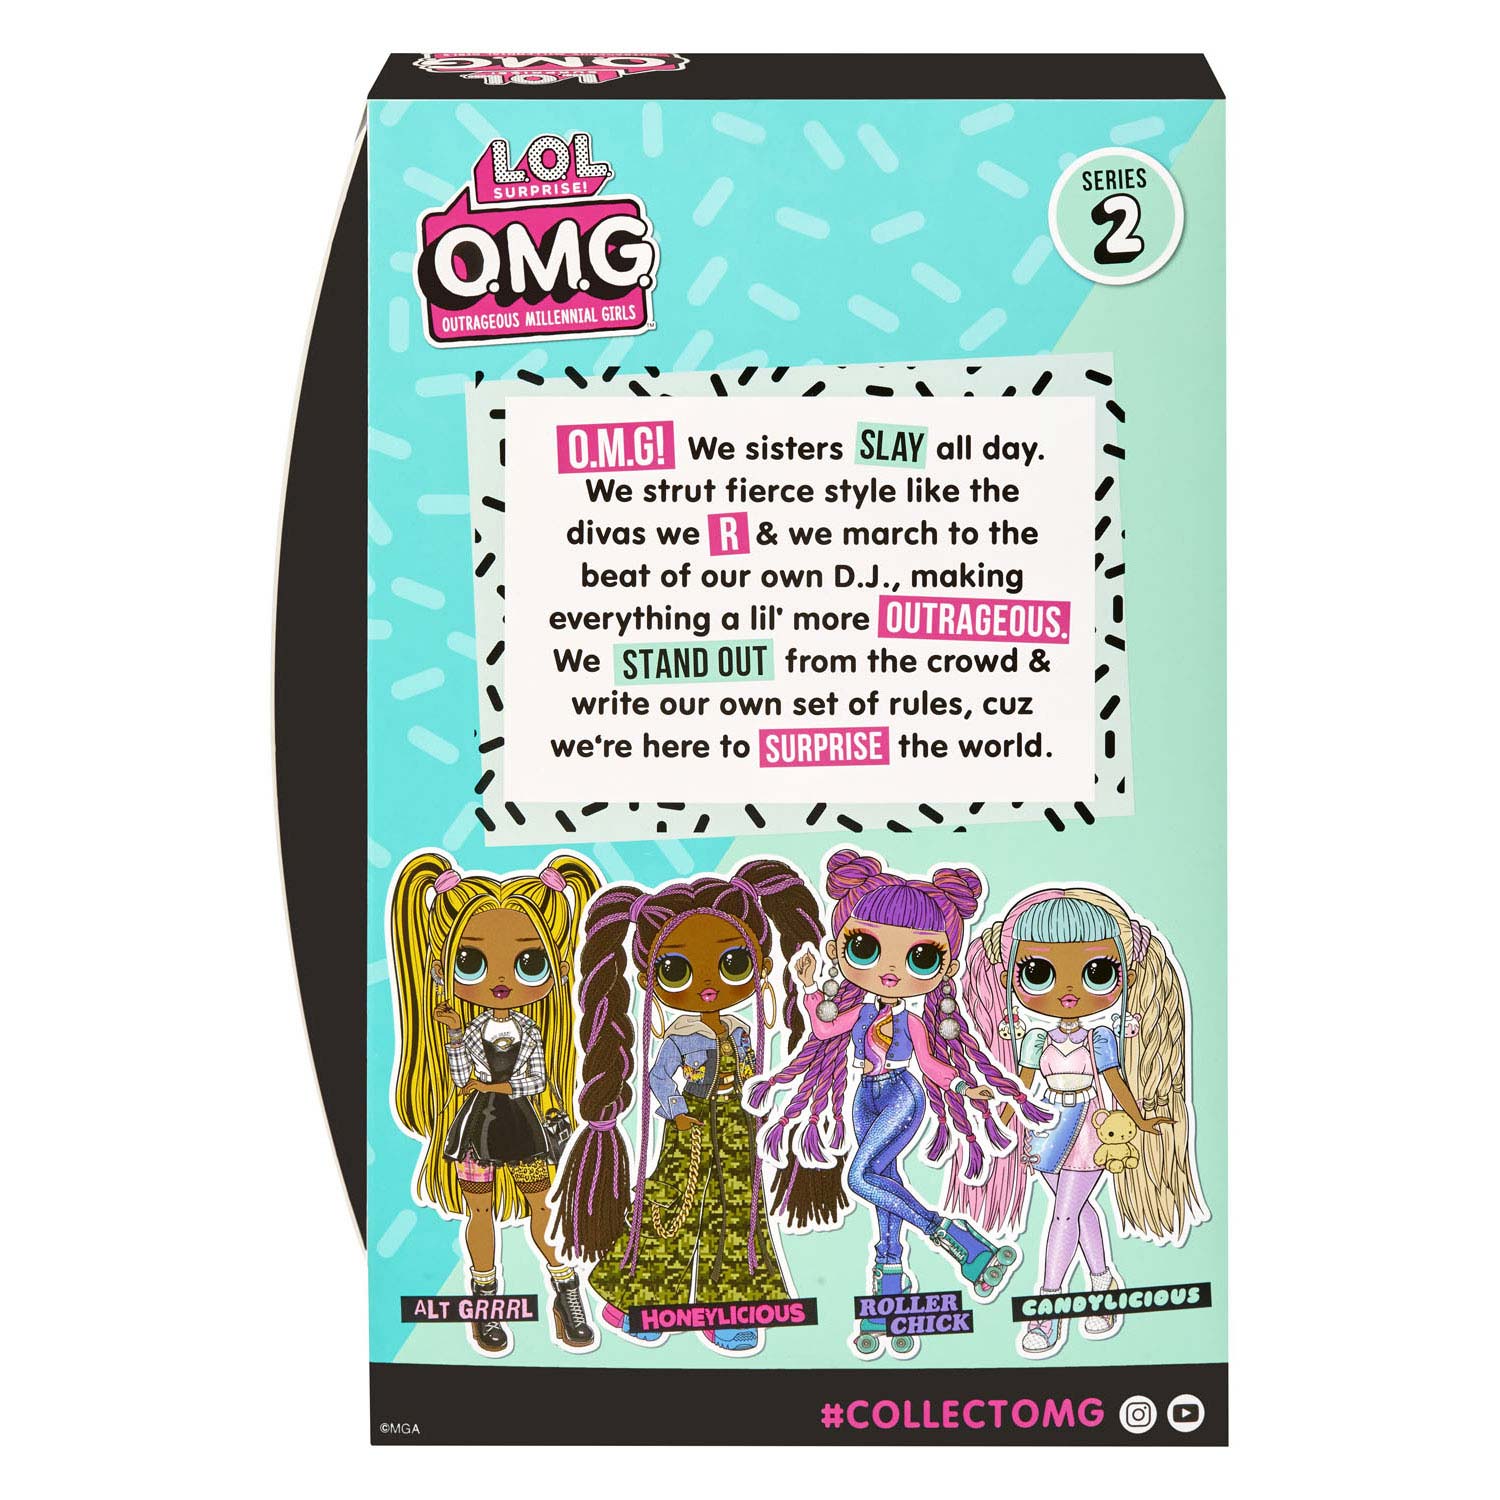 Lol surprise omg series 2 will be getting another re release : r/Dolls